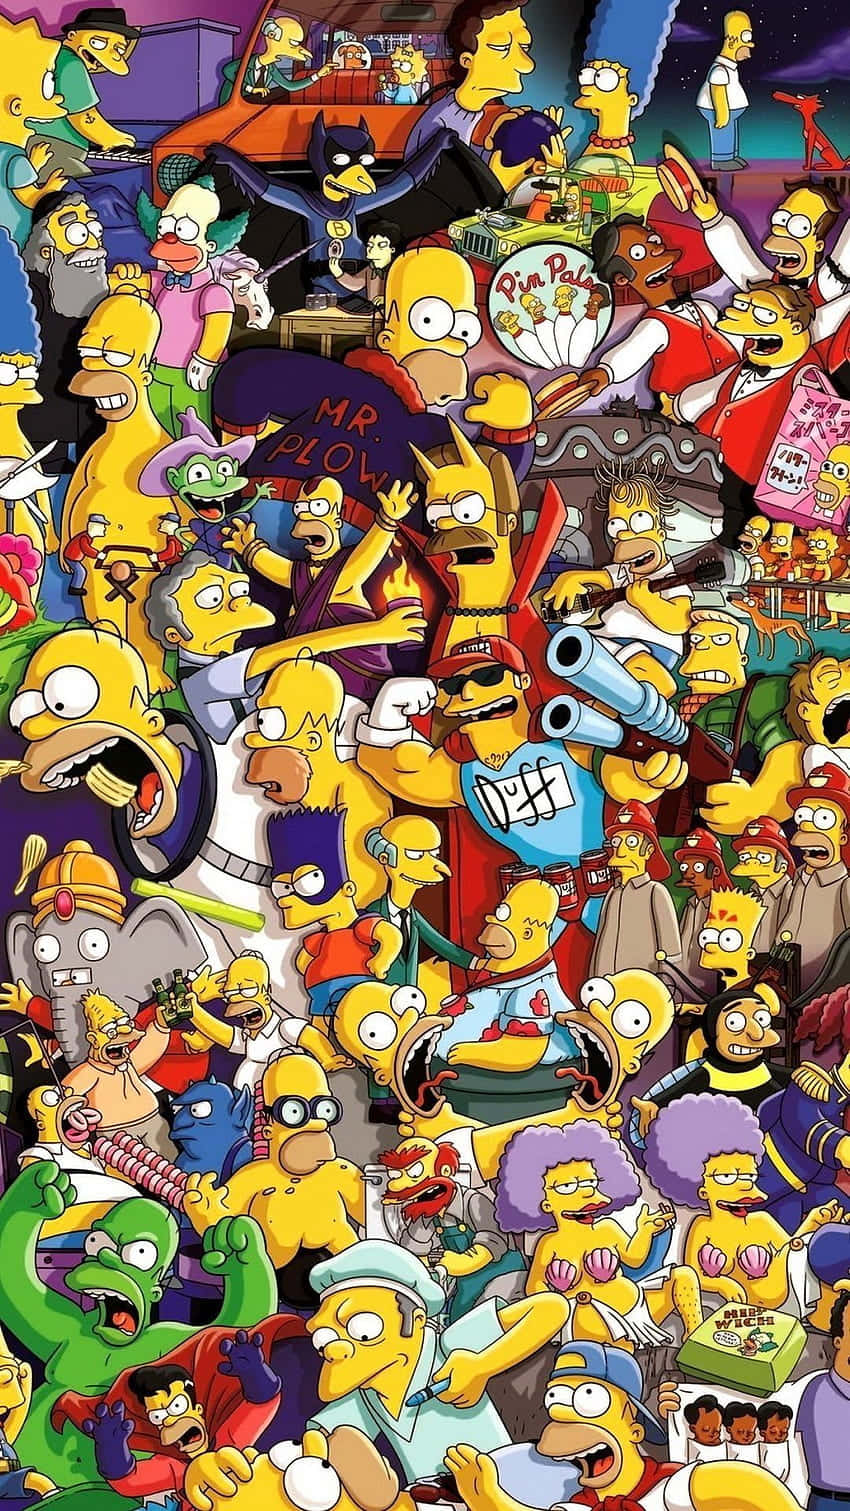 The Simpsons – The Iconic animated family that have made us laugh for generations.